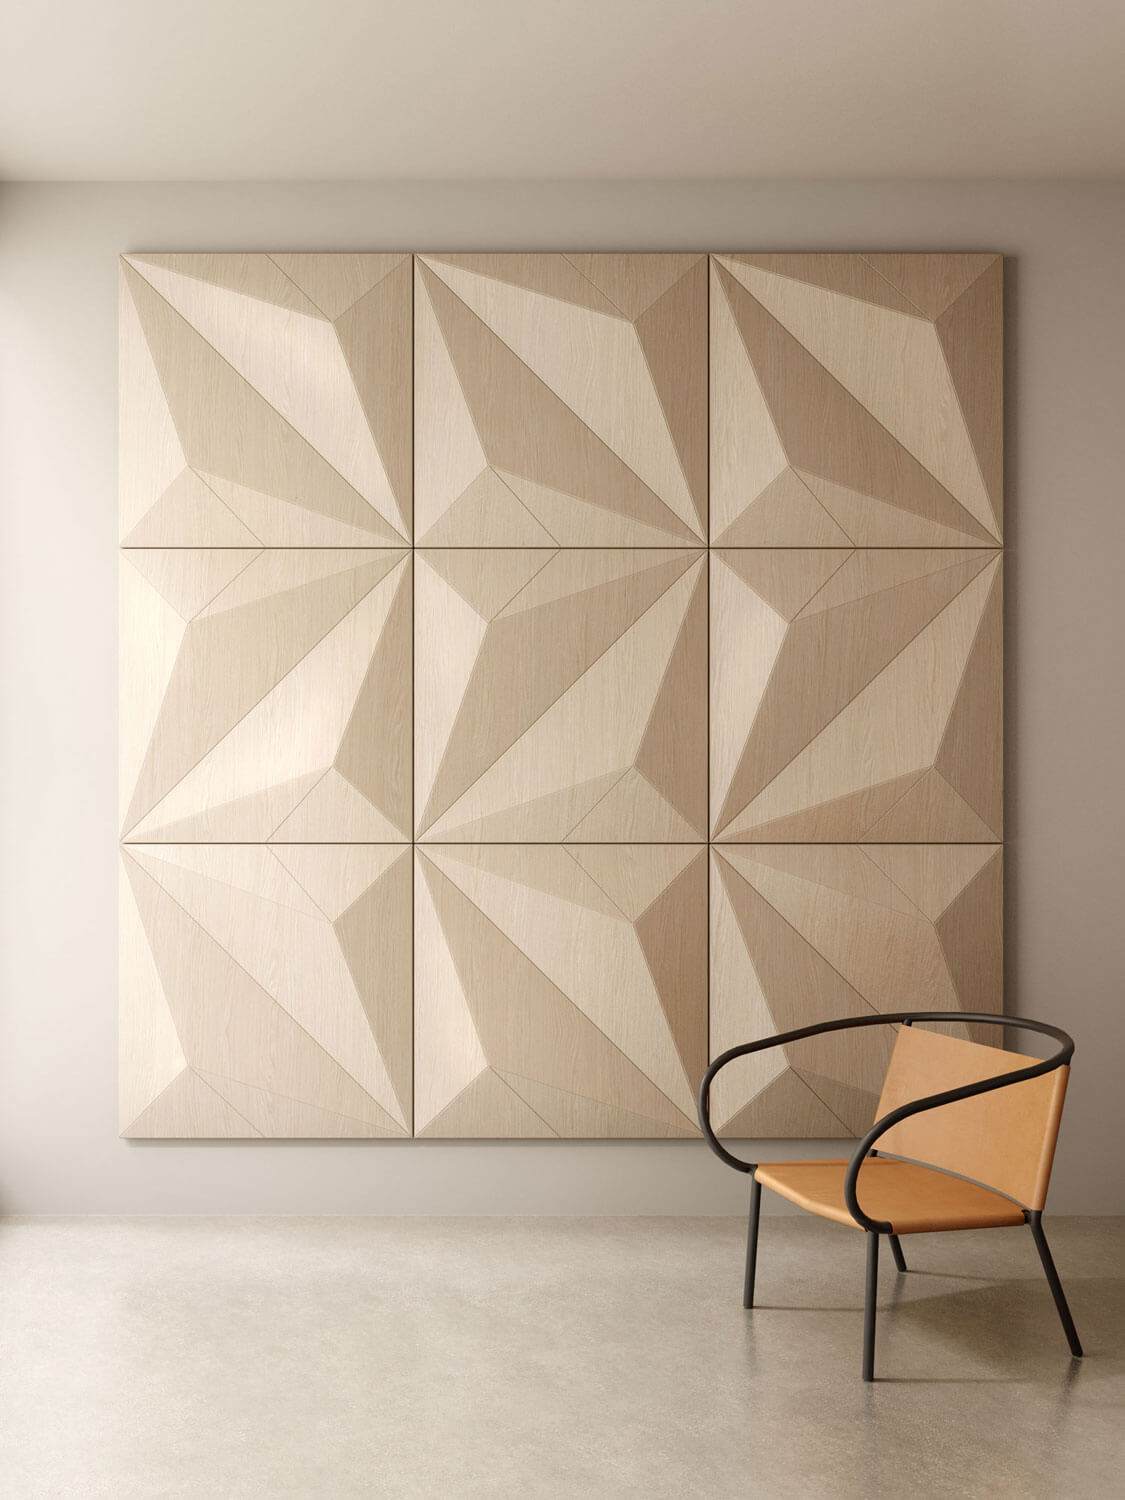 WOOD-SKIN Panels - O-gami neutral composition panel